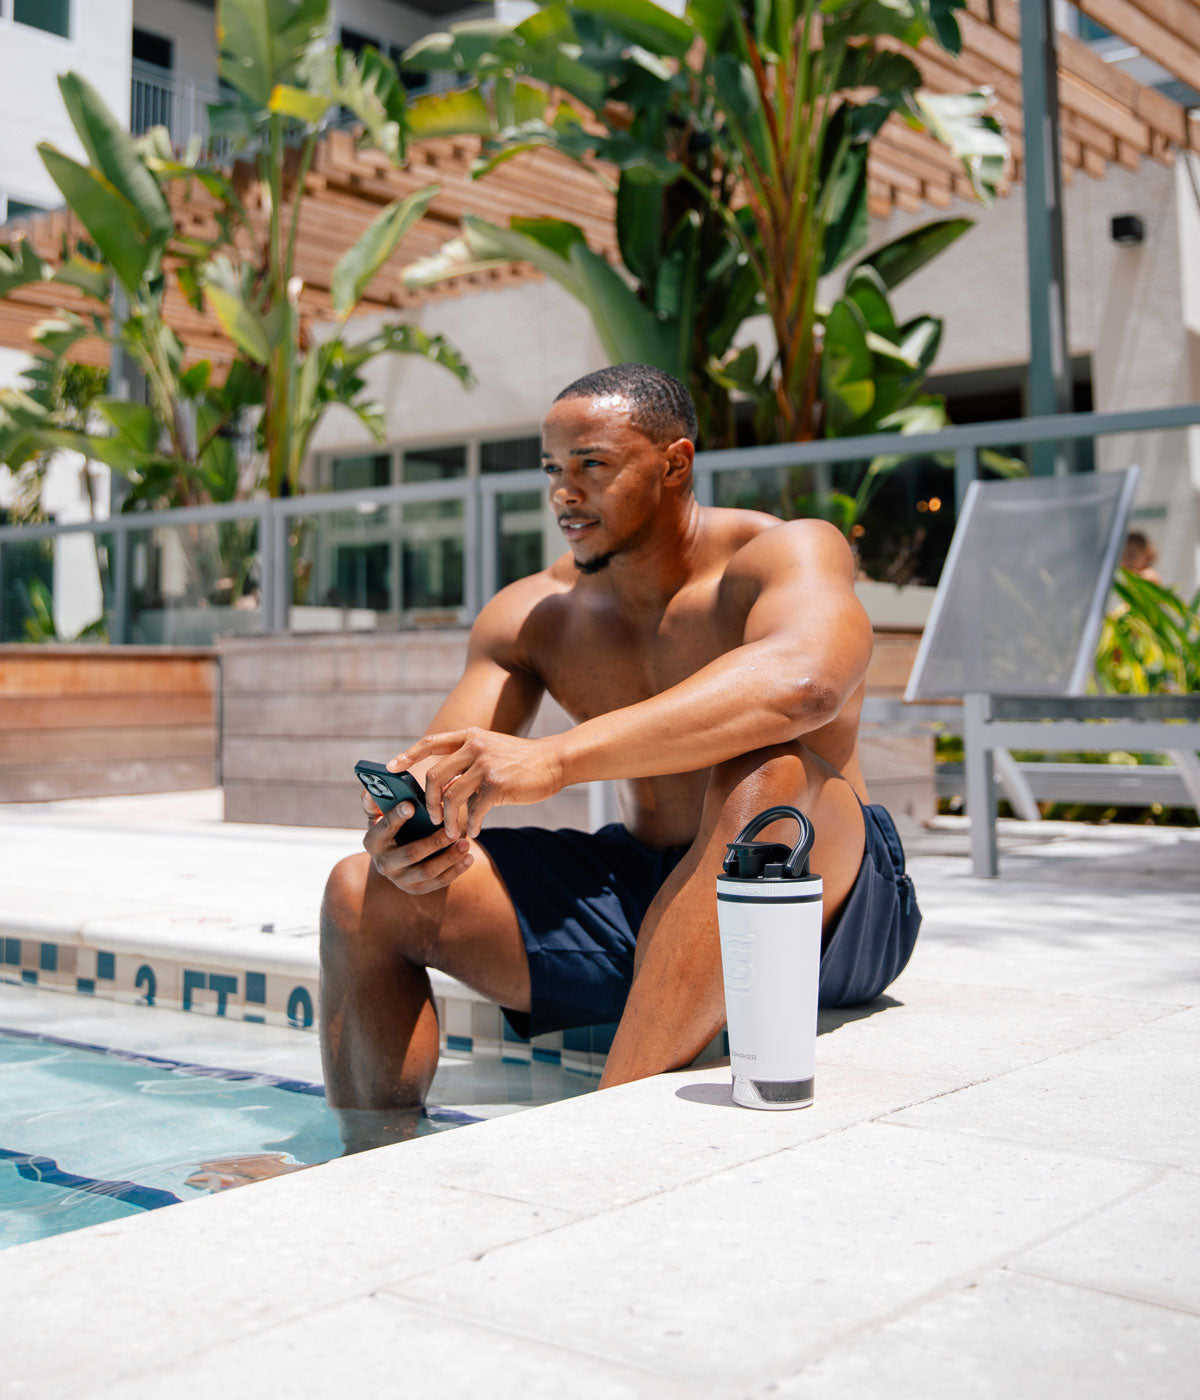 A young, African-American man is sitting by a pool with his feet in the water. He has his phone in his hand and a white 20oz Speaker Bottle next to him.